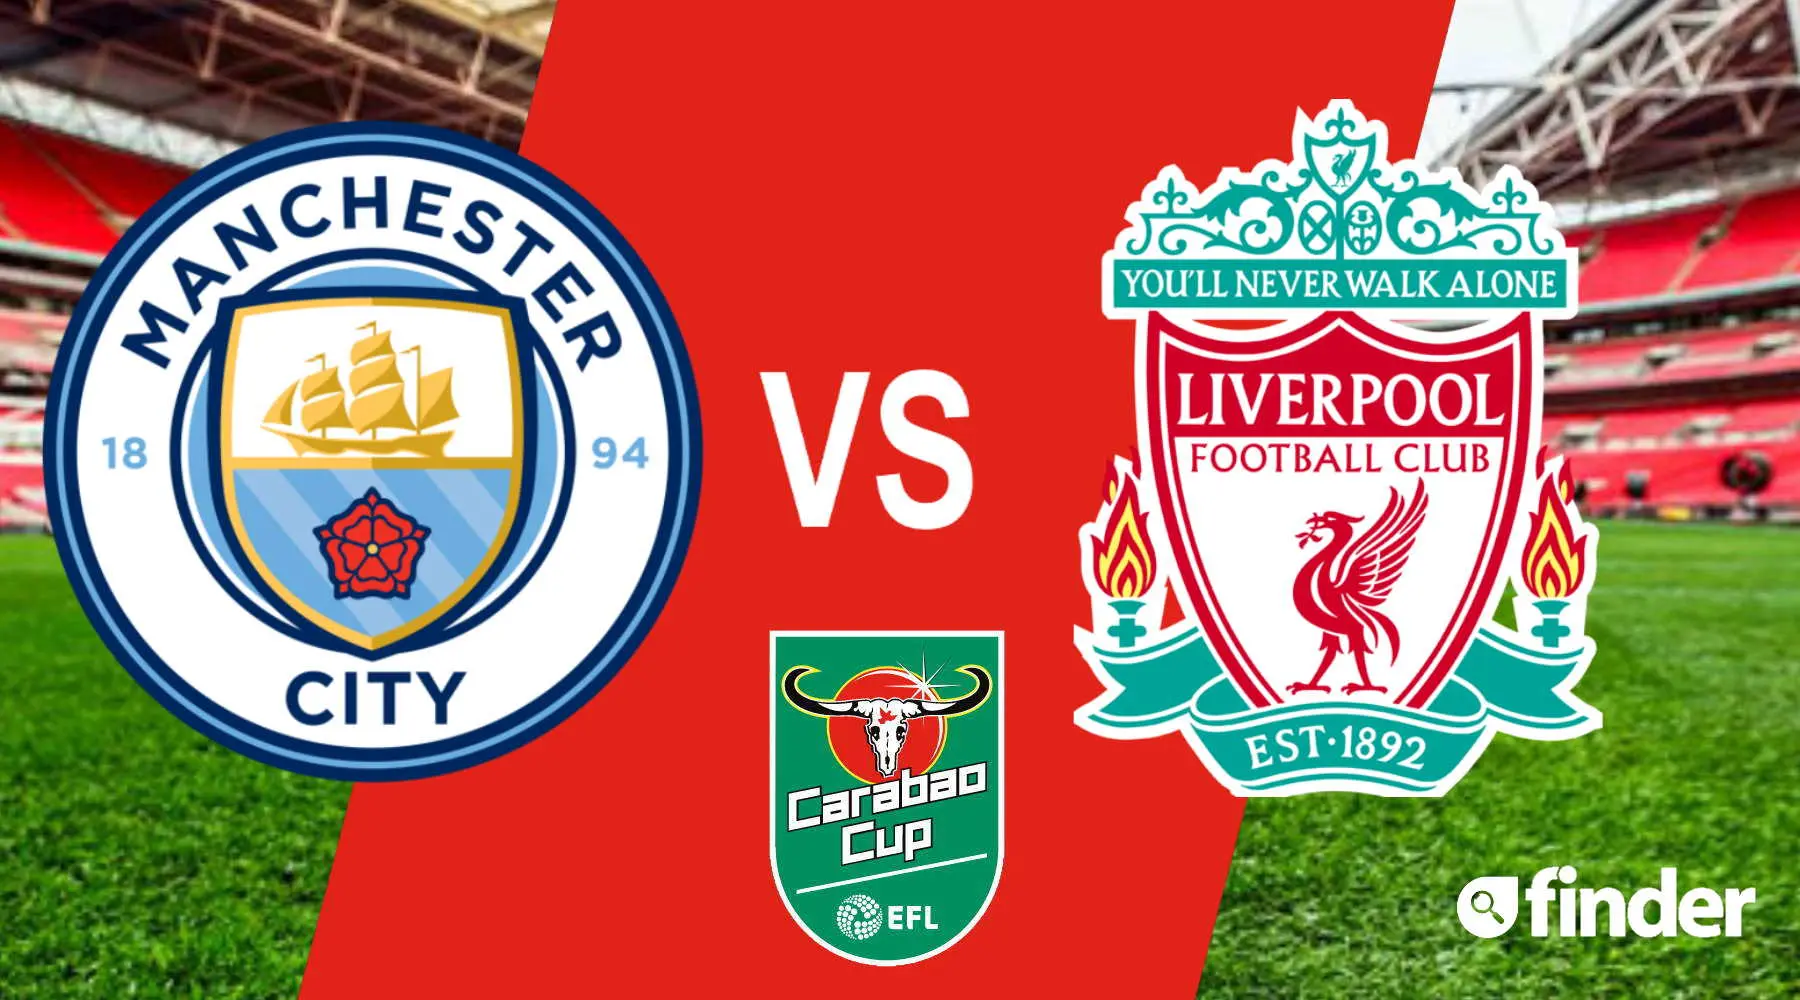 Man City vs Liverpool How to watch 2022 Carabao Cup match live